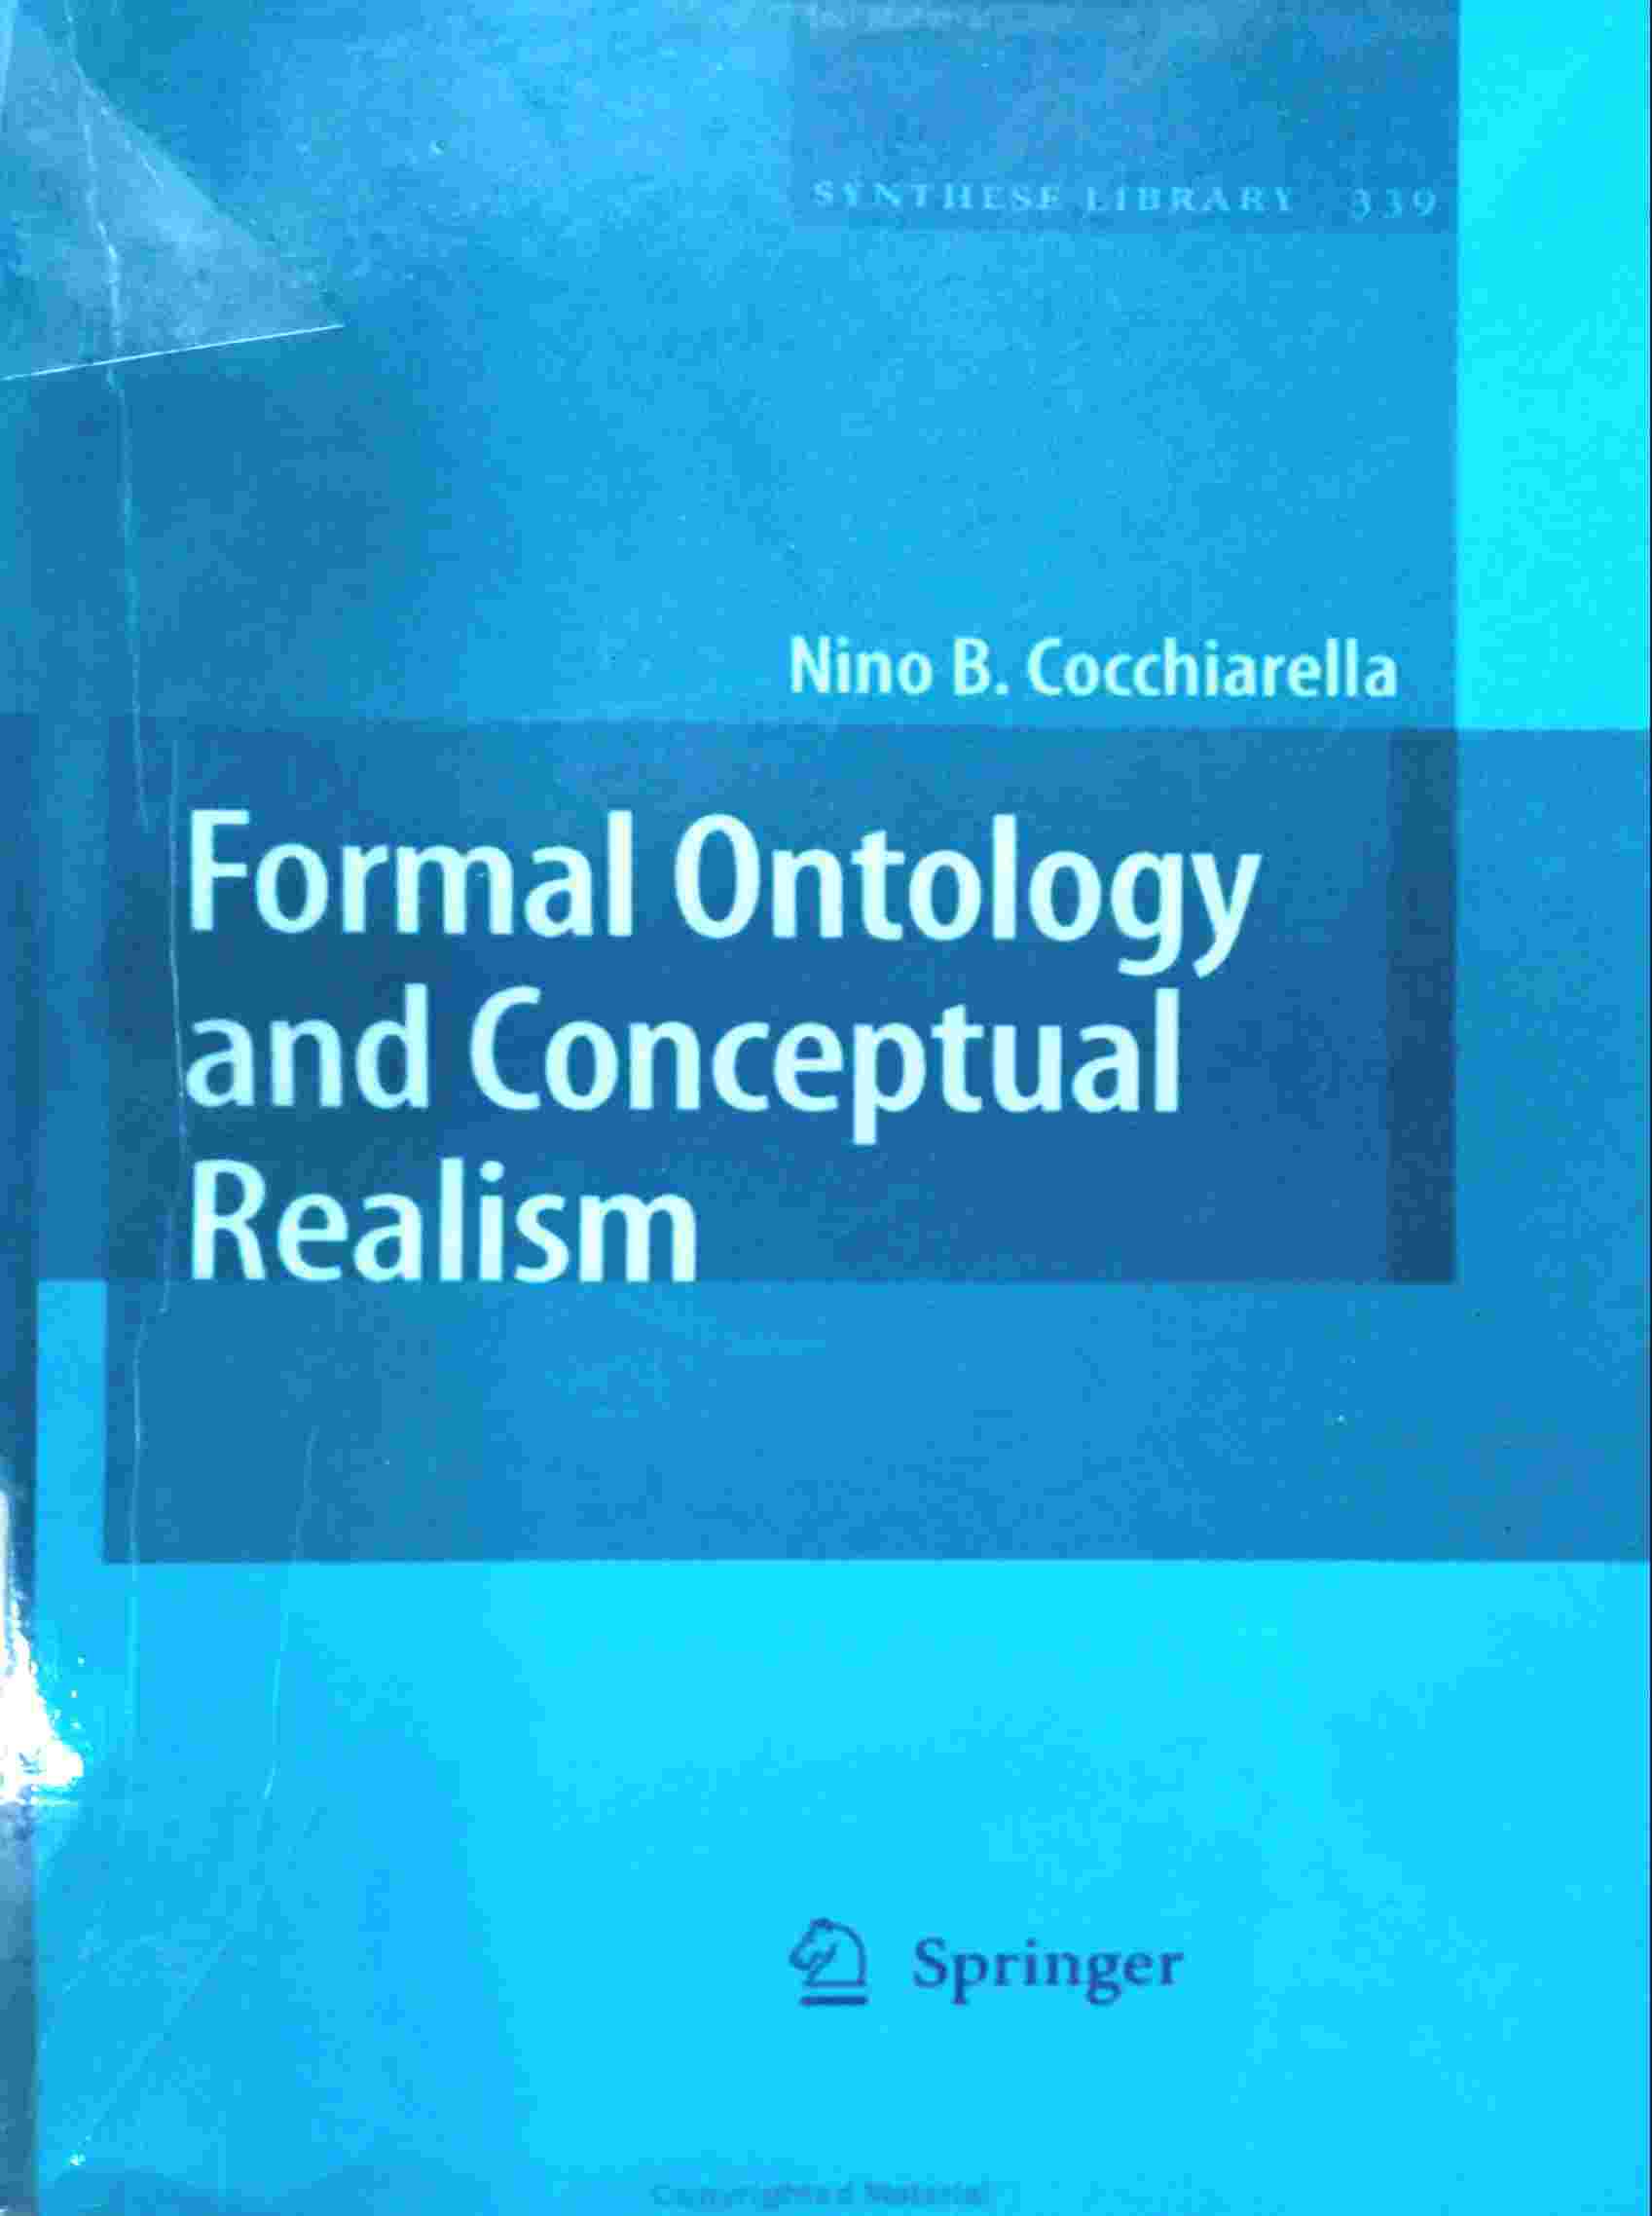 FORMAL ONTOLOGY AND CONCEPTUAL REALISM